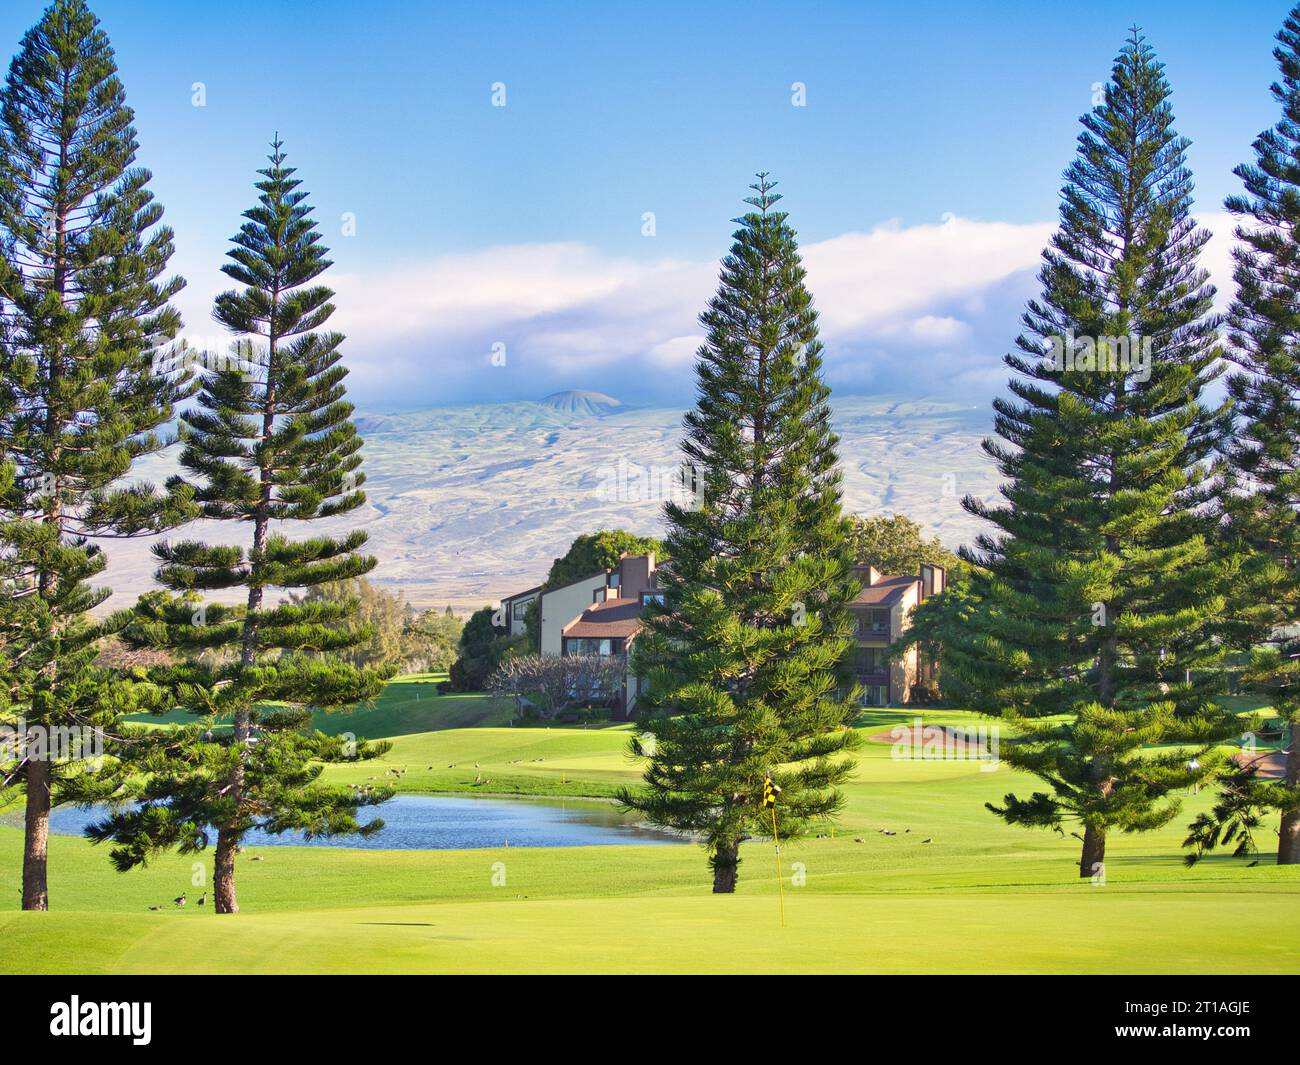 View of green golf course on the Big Island of Hawaii, resort location with lake, nene geese, trees, and mountains. Stock Photo